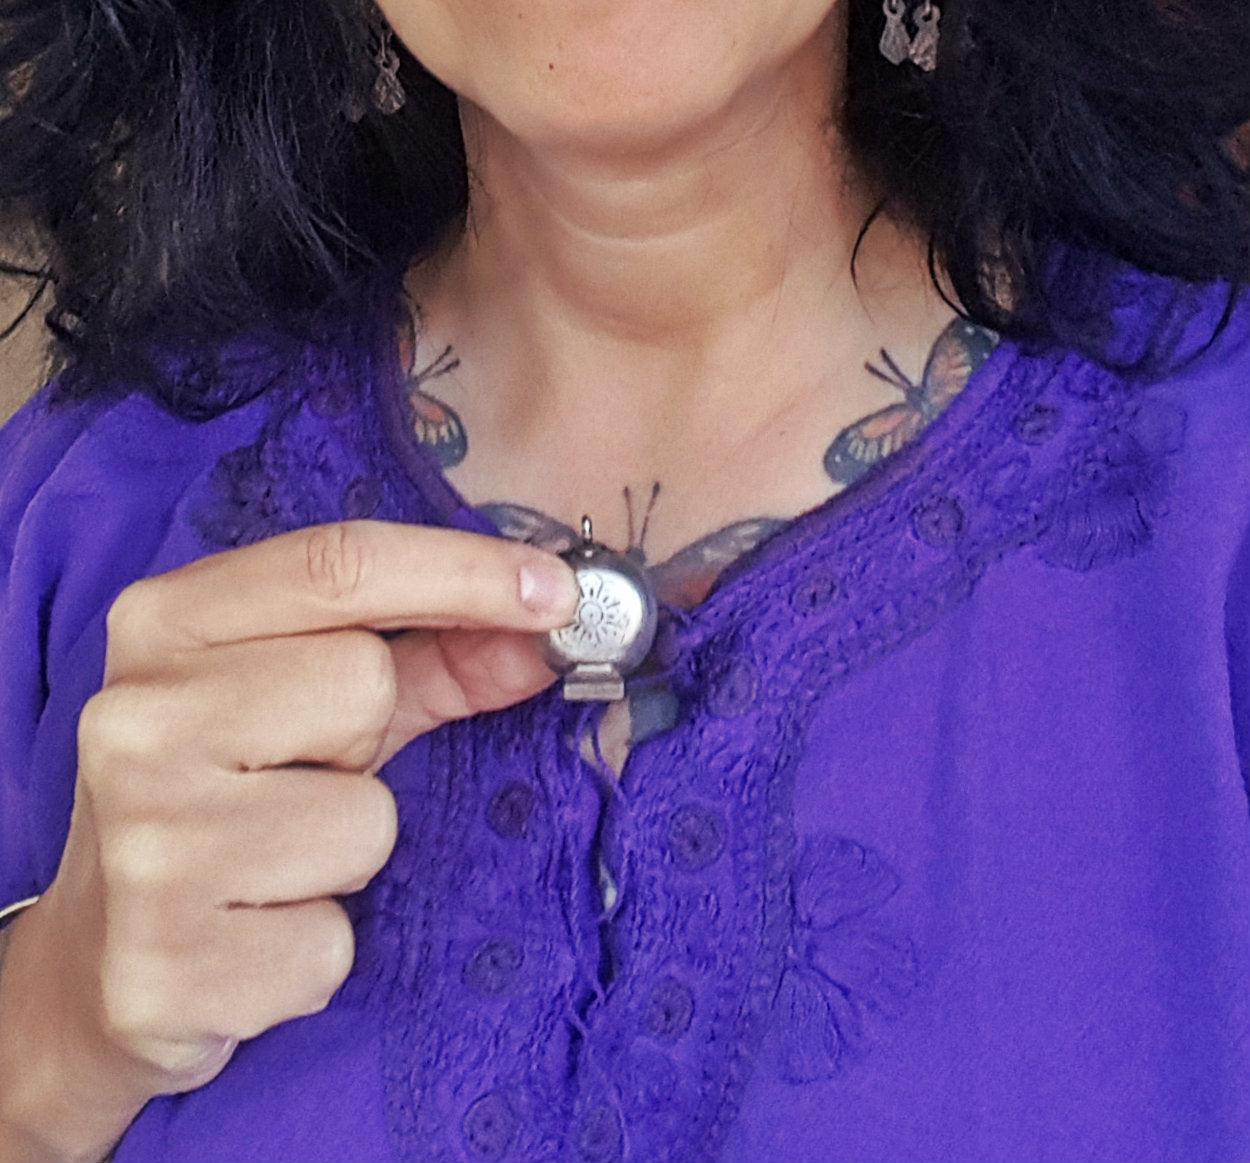 Indian Silver Box Container Pendant